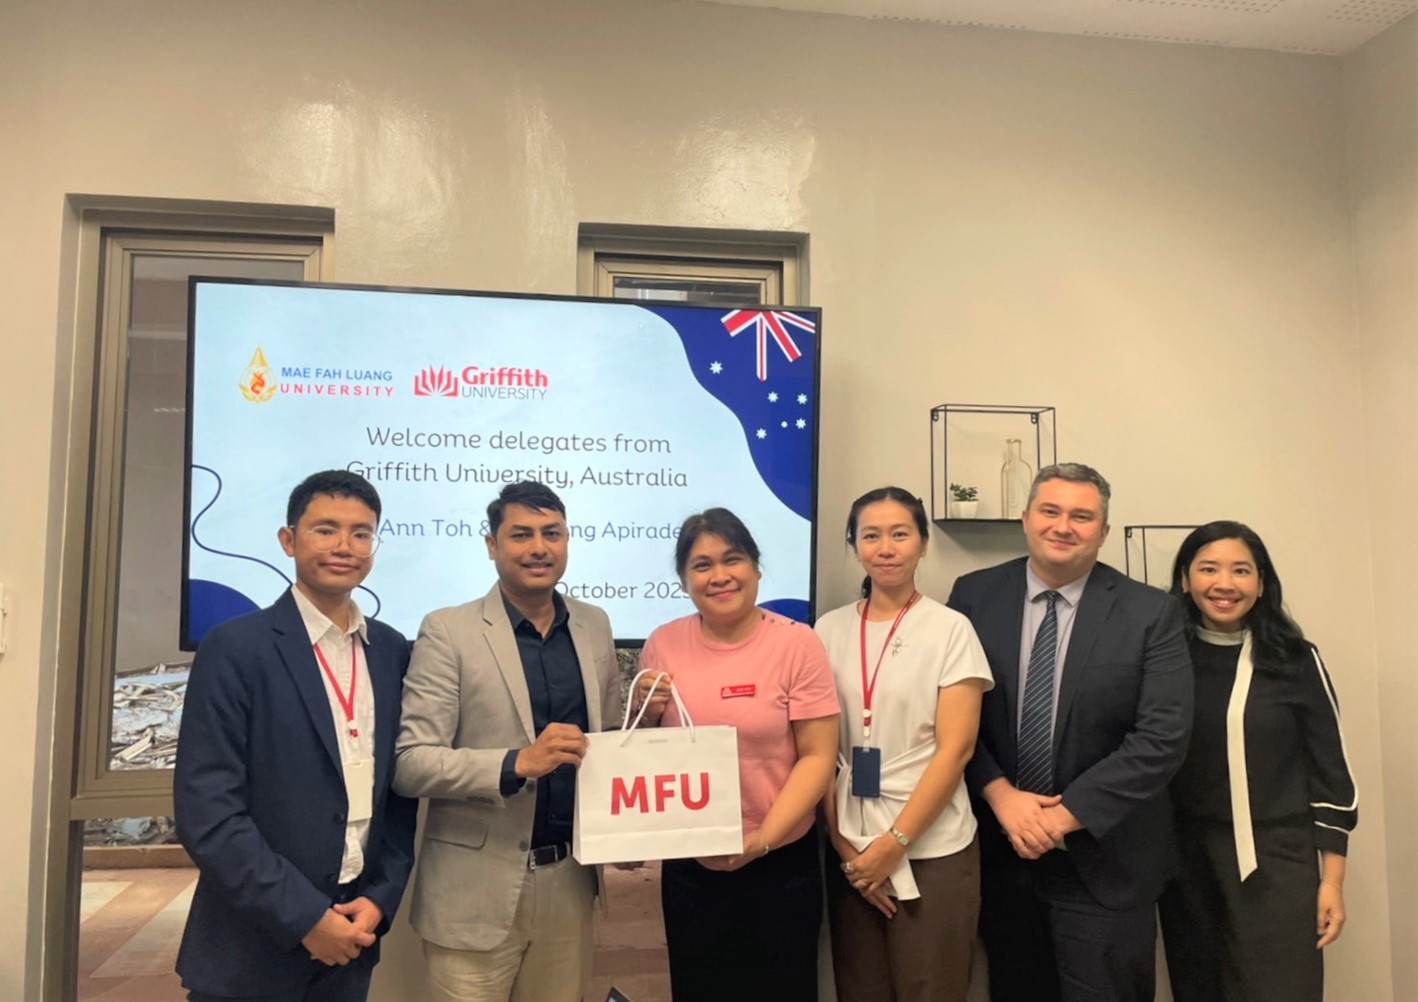 A Visit of Griffith University for Future Cooperation